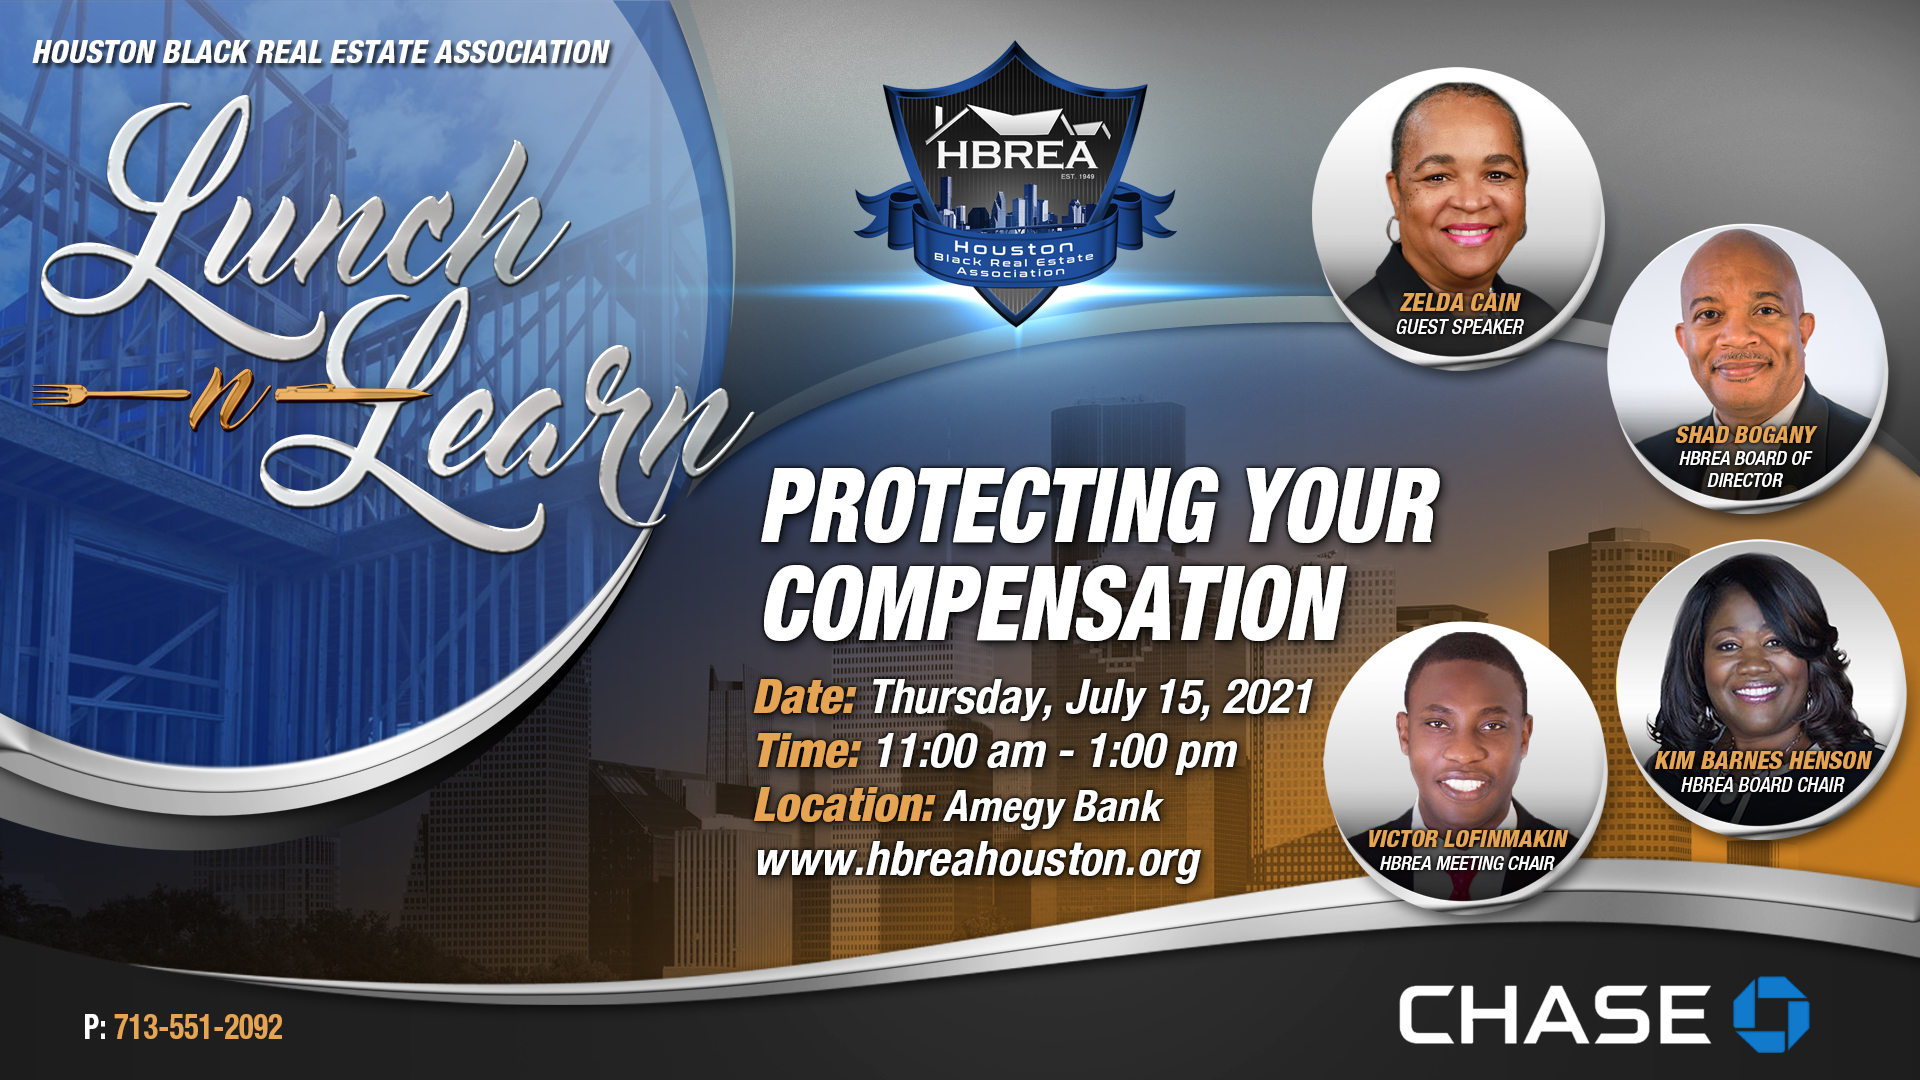 HBREA - Amegy Bank - Lunch-n-Learn - Protecting Your Compensation - Zelda Cain, Shad Bogany, Kim Barnes-Henson, Victor Lofinmakin